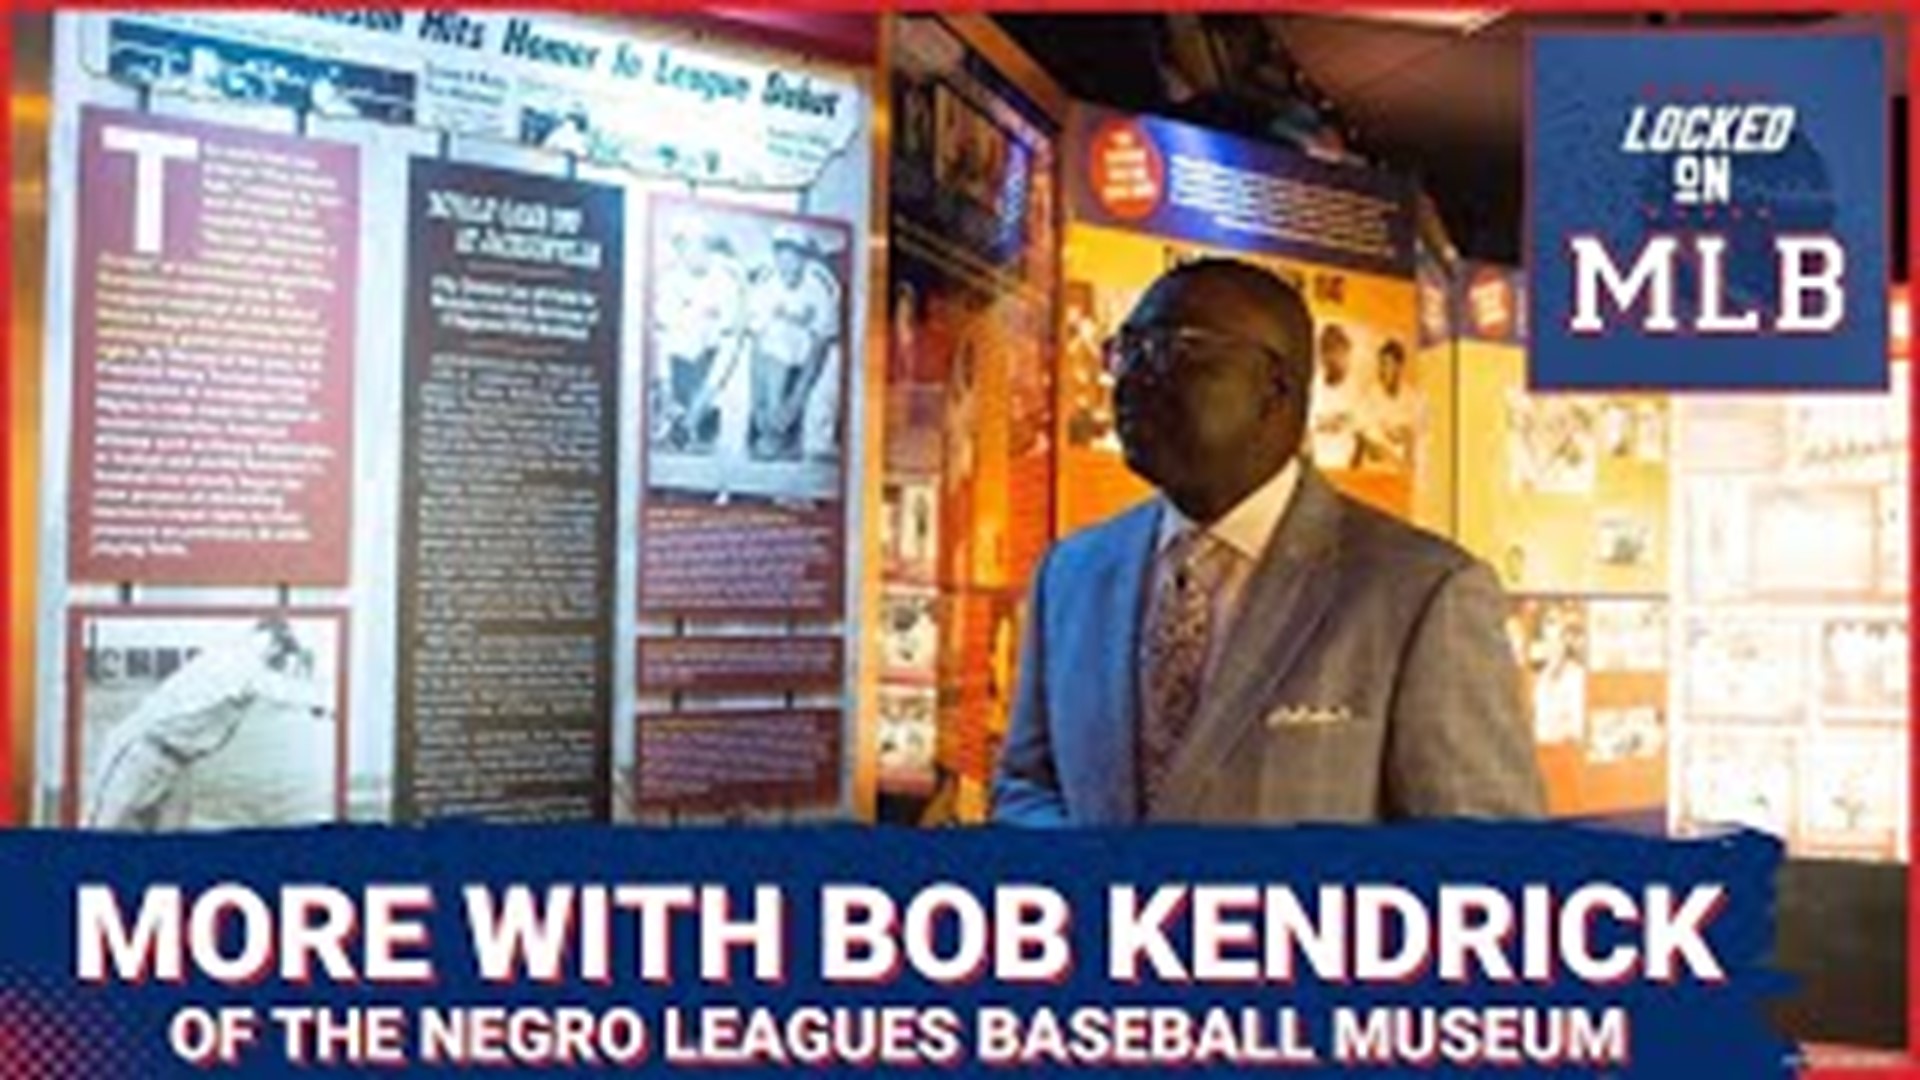 A few weeks ago,  Bob Kendrick of the Negro Leagues Baseball Museum joined the podcast to discuss the legacy of the Negro Leagues and its effect on baseball to this